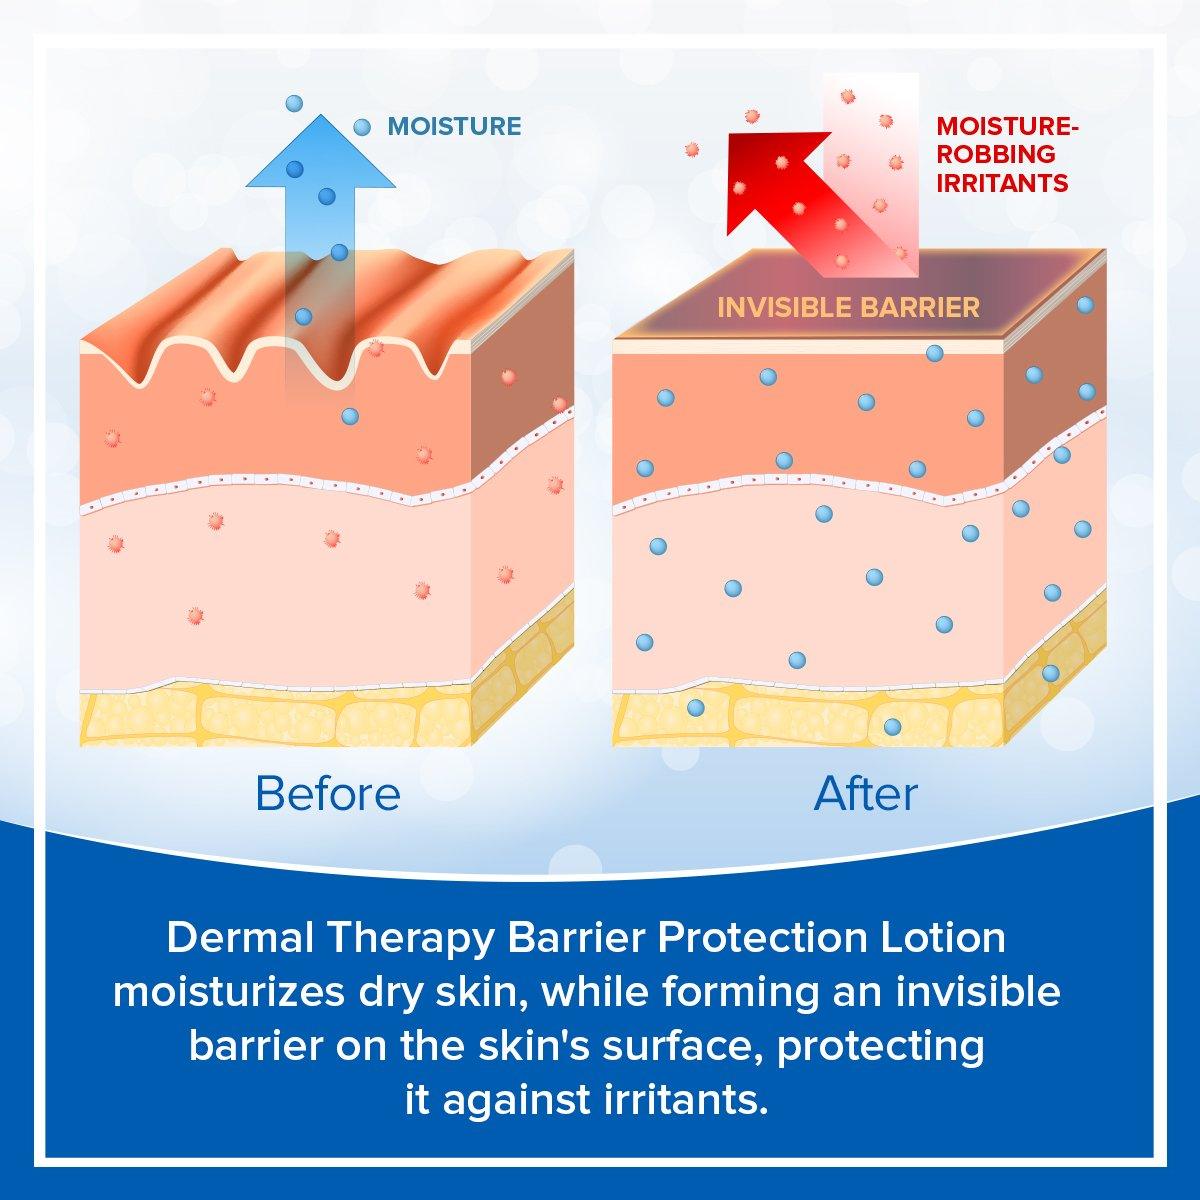 Barrier Protection Lotion - Dermal Therapy™ 1% Alpha Hydroxy Acids, 10% Urea, AHA, barrier, Barrier Protection Lotion, dermaltherapy, fragrance-free, irritants, Lotion, Moisturizer, non-greasy, petrolatum-free, protection, silk proteins, urea, very dry skin Lotion 1% Alpha Hydroxy Acids, 10% Urea, AHA, barrier, Barrier Protection Lotion, dermaltherapy, fragrance-free, irritants, Lotion, Moisturizer, non-greasy, petrolatum-free, protection, silk proteins, urea, very dry skin